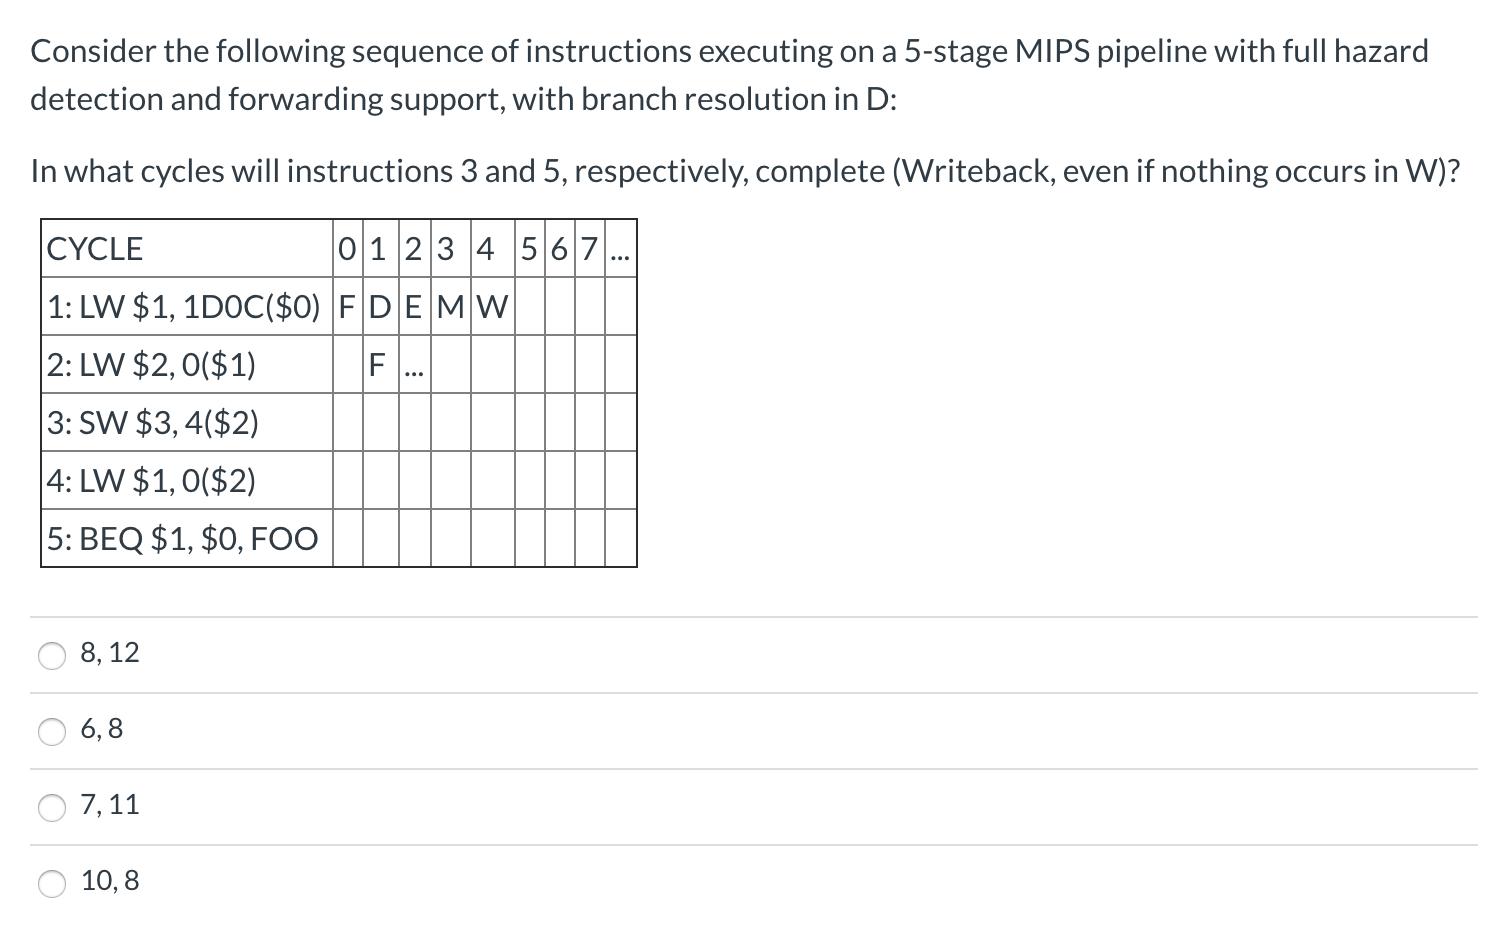 Consider the following sequence of instructions executing on a 5-stage MIPS pipeline with full hazard